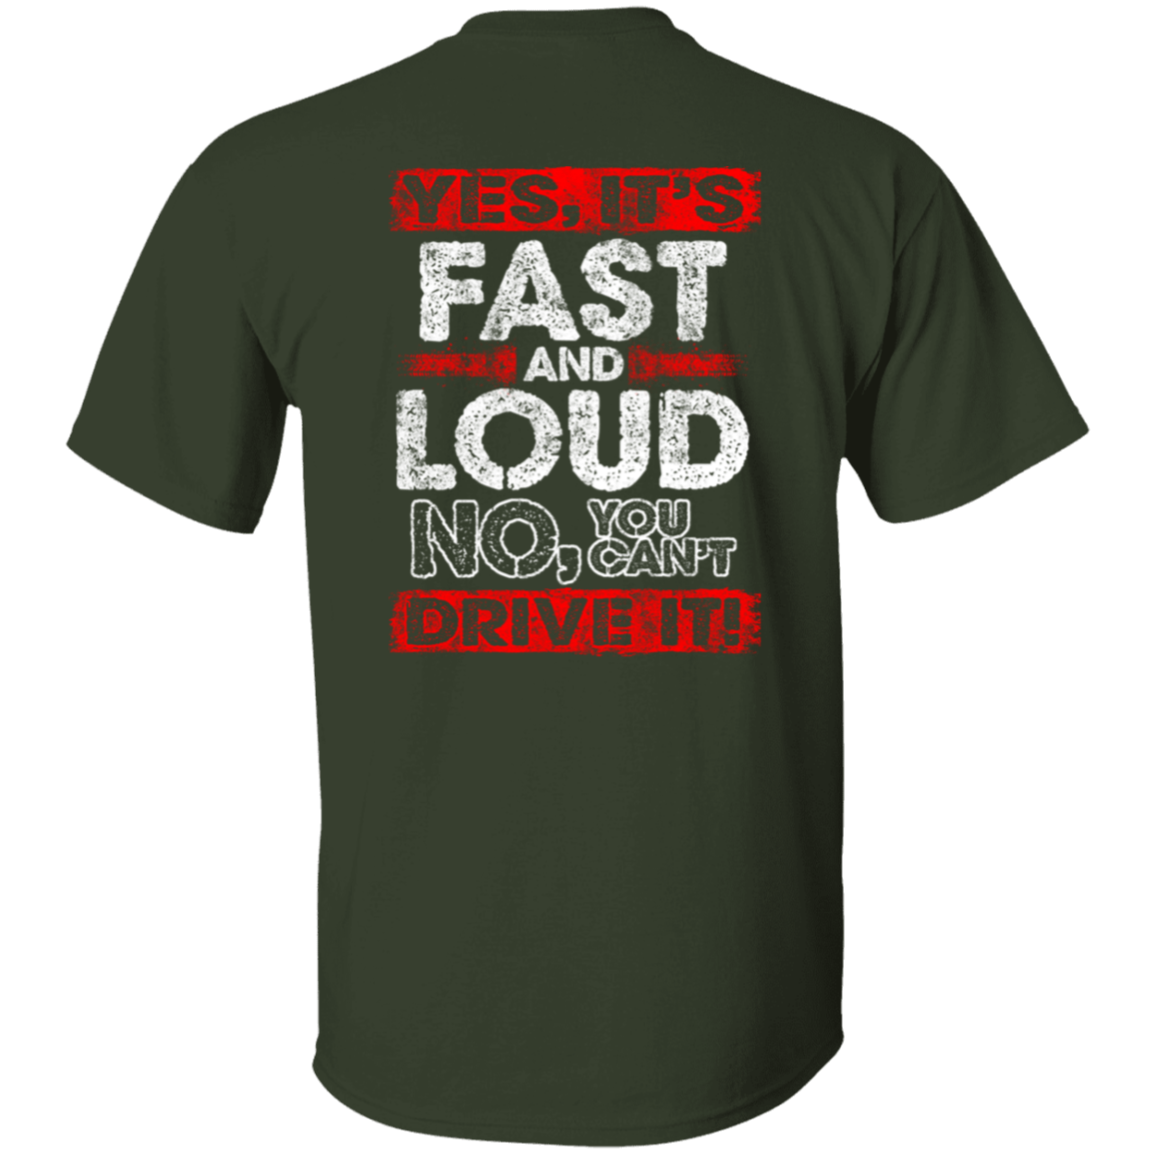 Yes It's Fast And Loud, NO You Can't Drive It 5.3 oz. T-Shirt